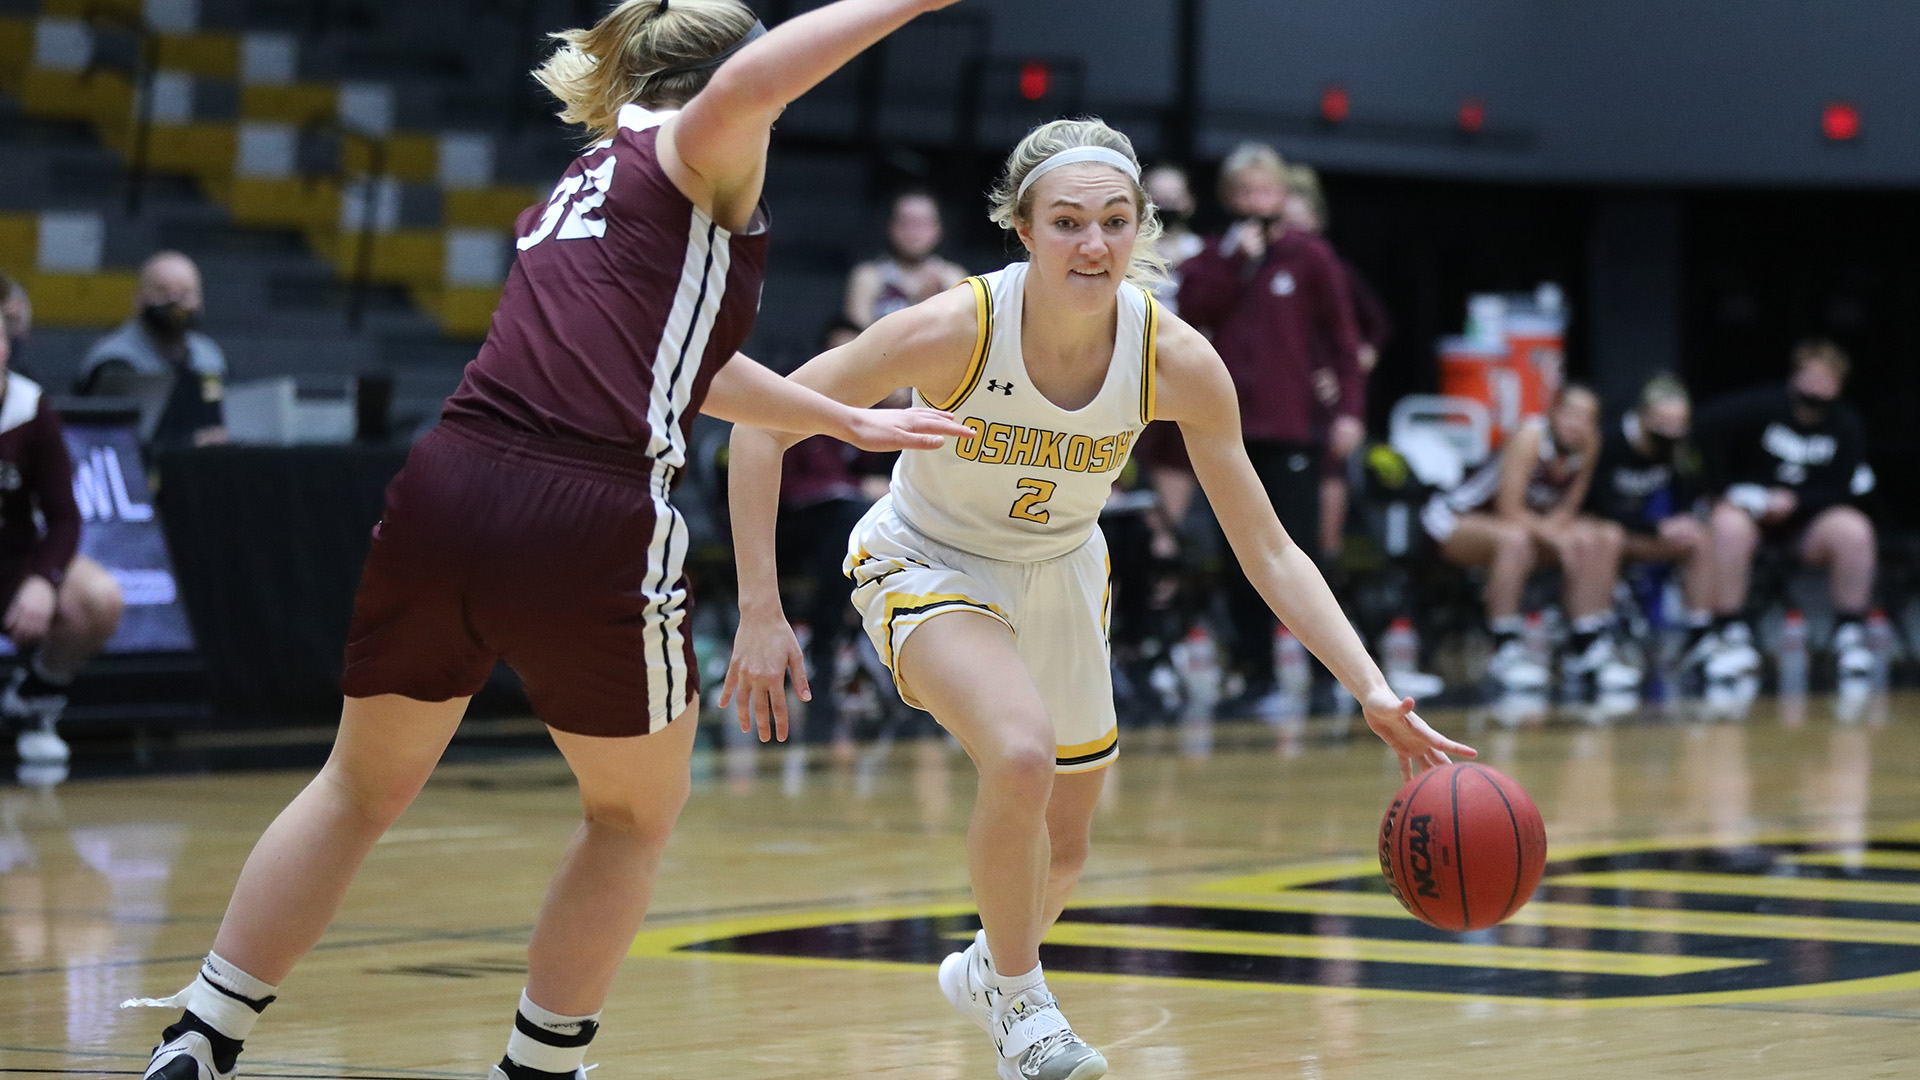 Abby Kaiser scored a career-best 16 points and collected seven rebounds against the Falcons.